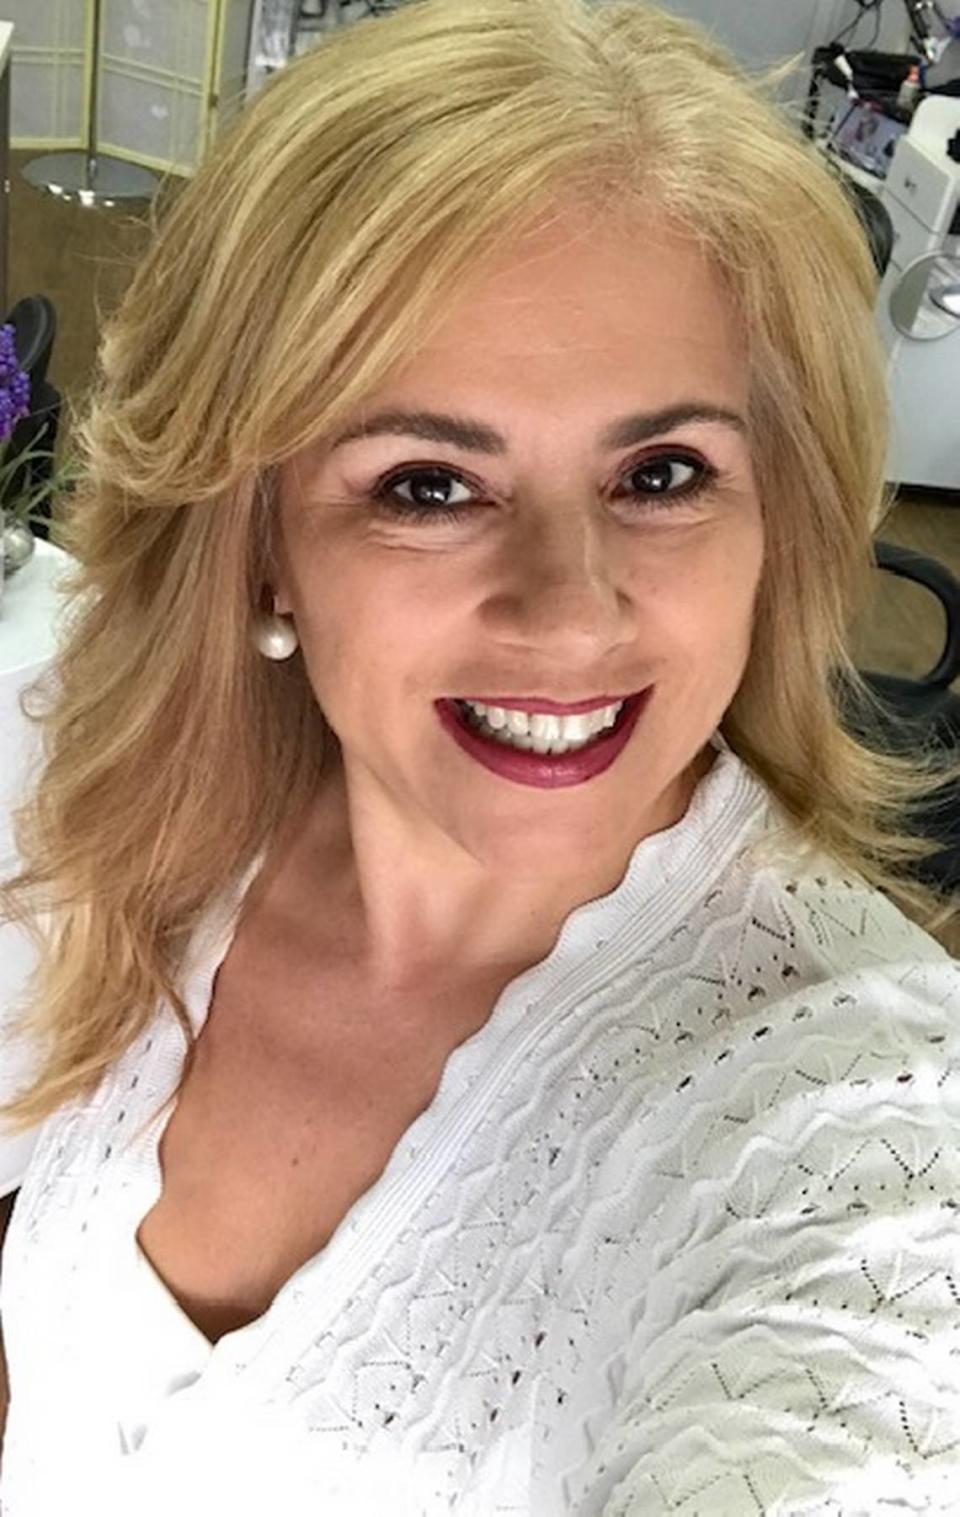 Sonia Angel, a dietitian and certified diabetes educator who leads the Diabetes and Nutrition Center at Memorial Regional Hospital in Hollywood.